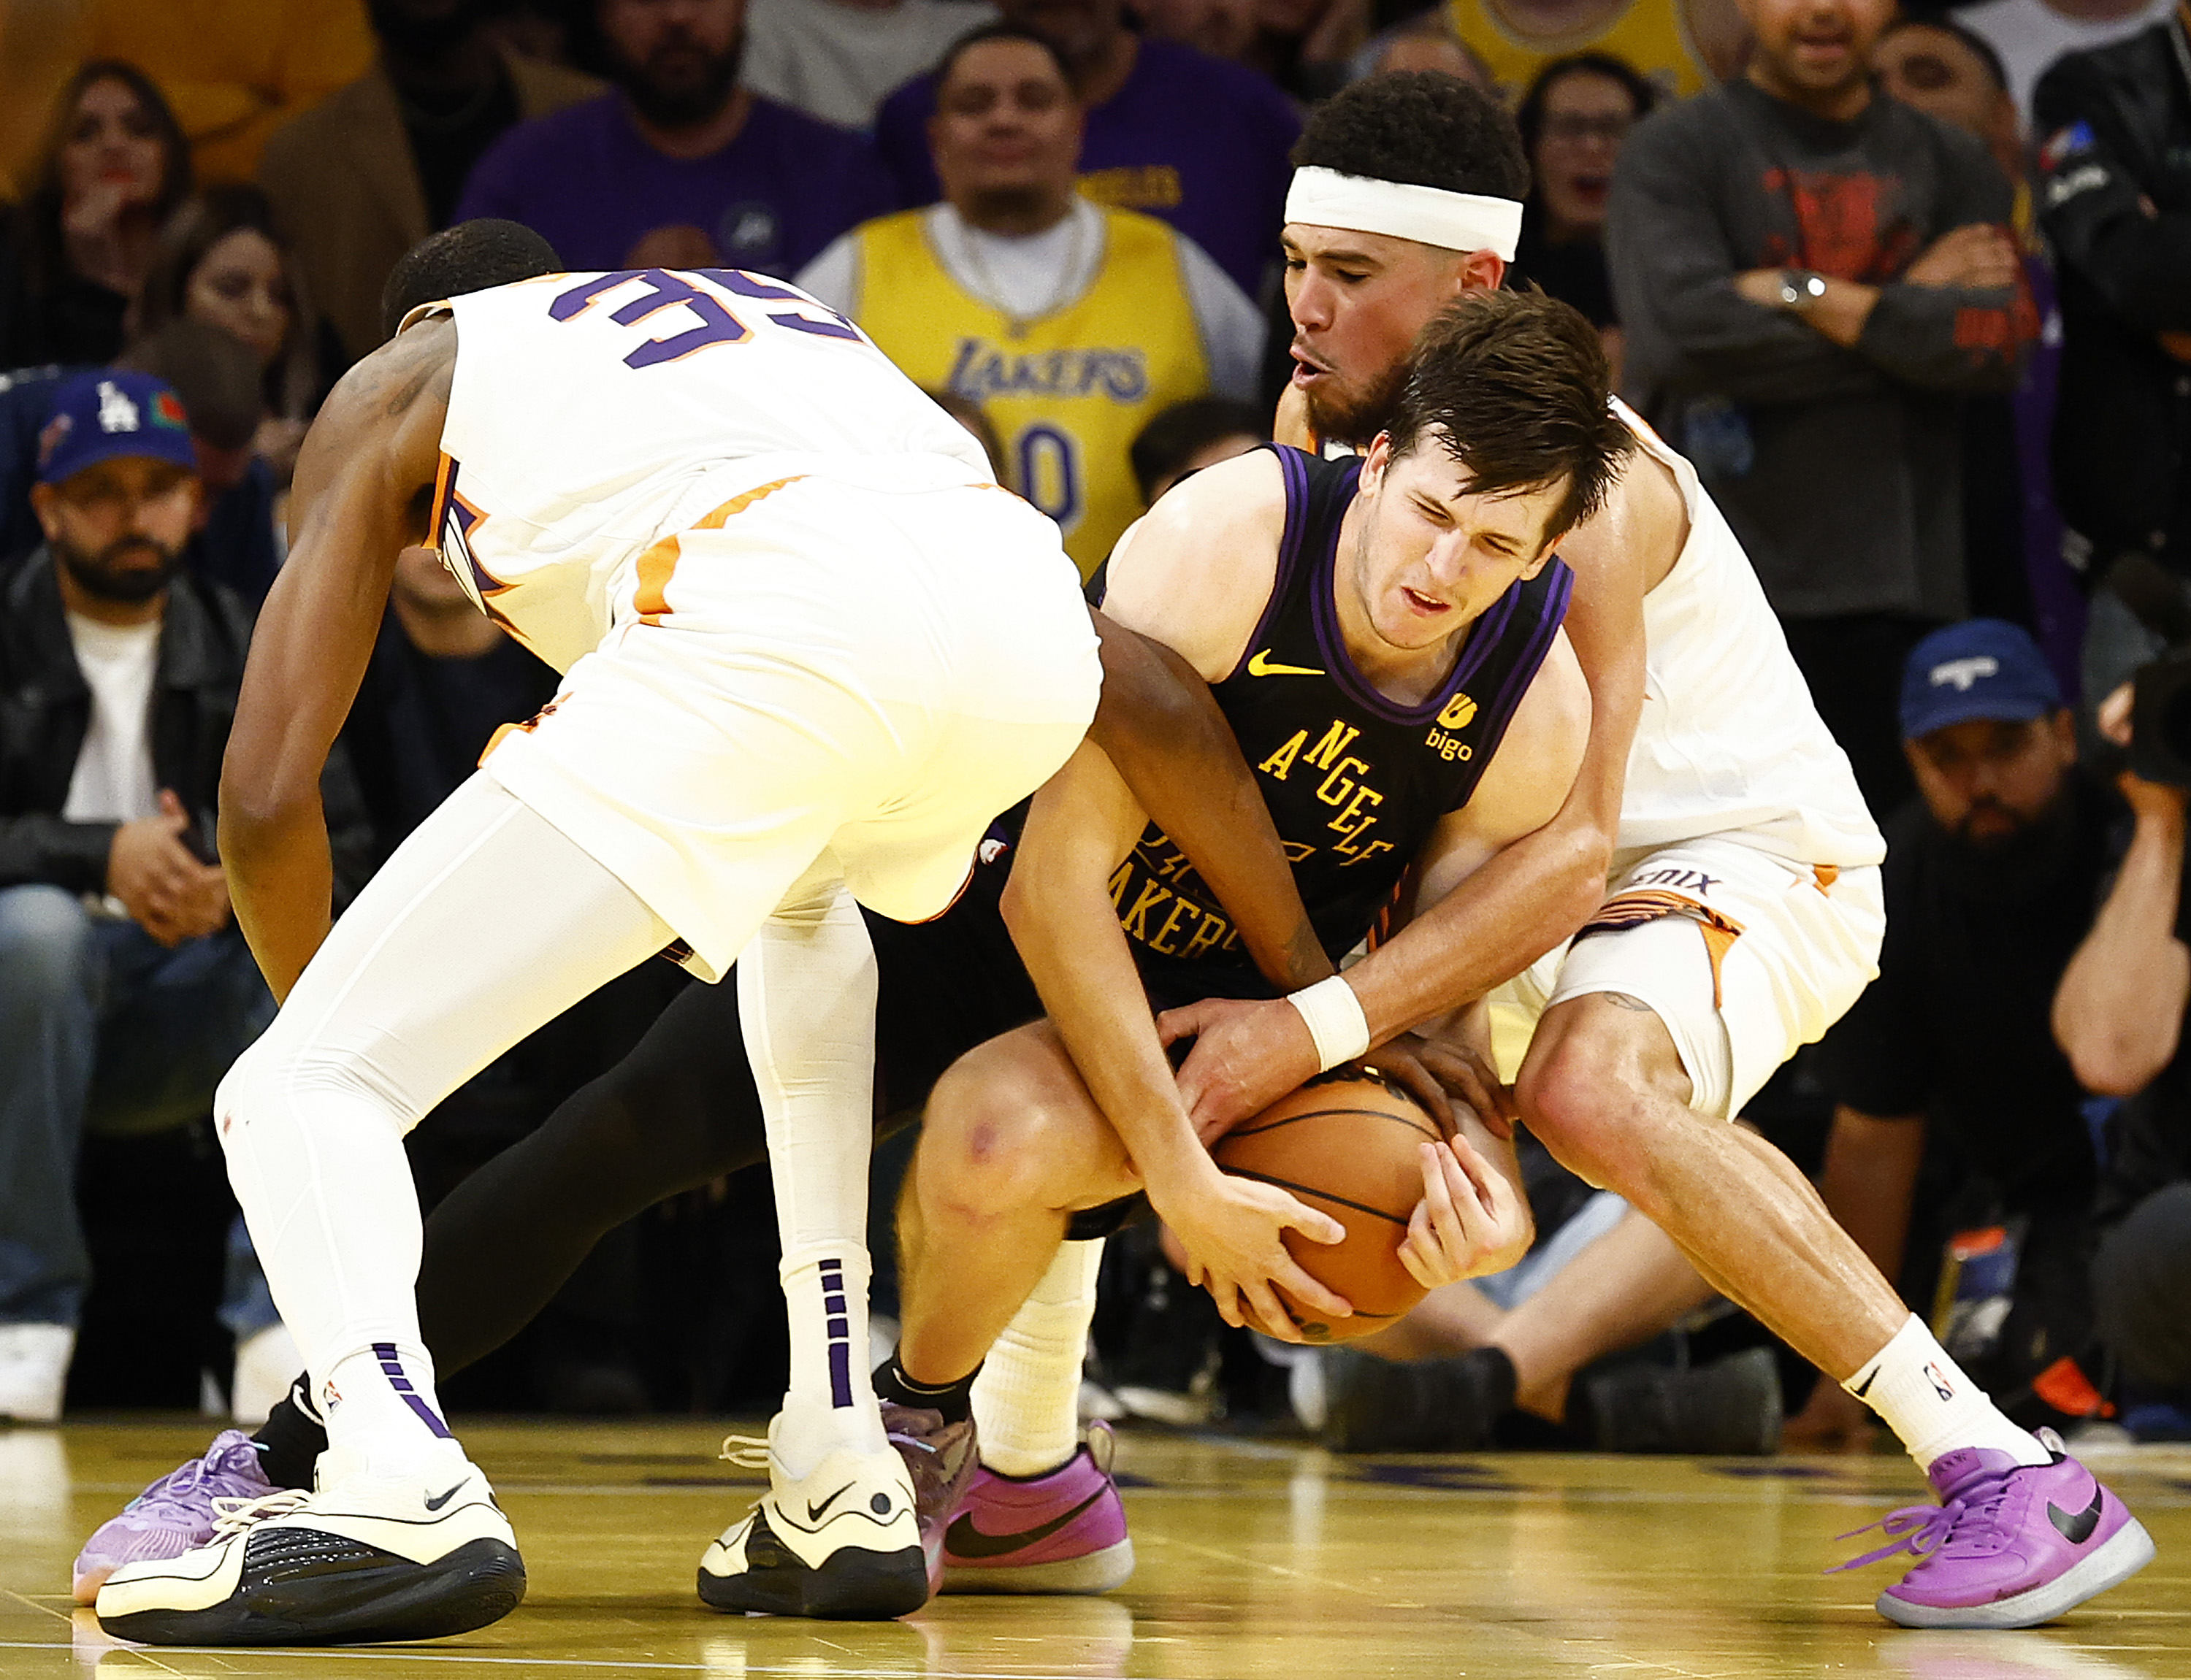 lakers beat suns amid nba tournament’s first big officiating controversy